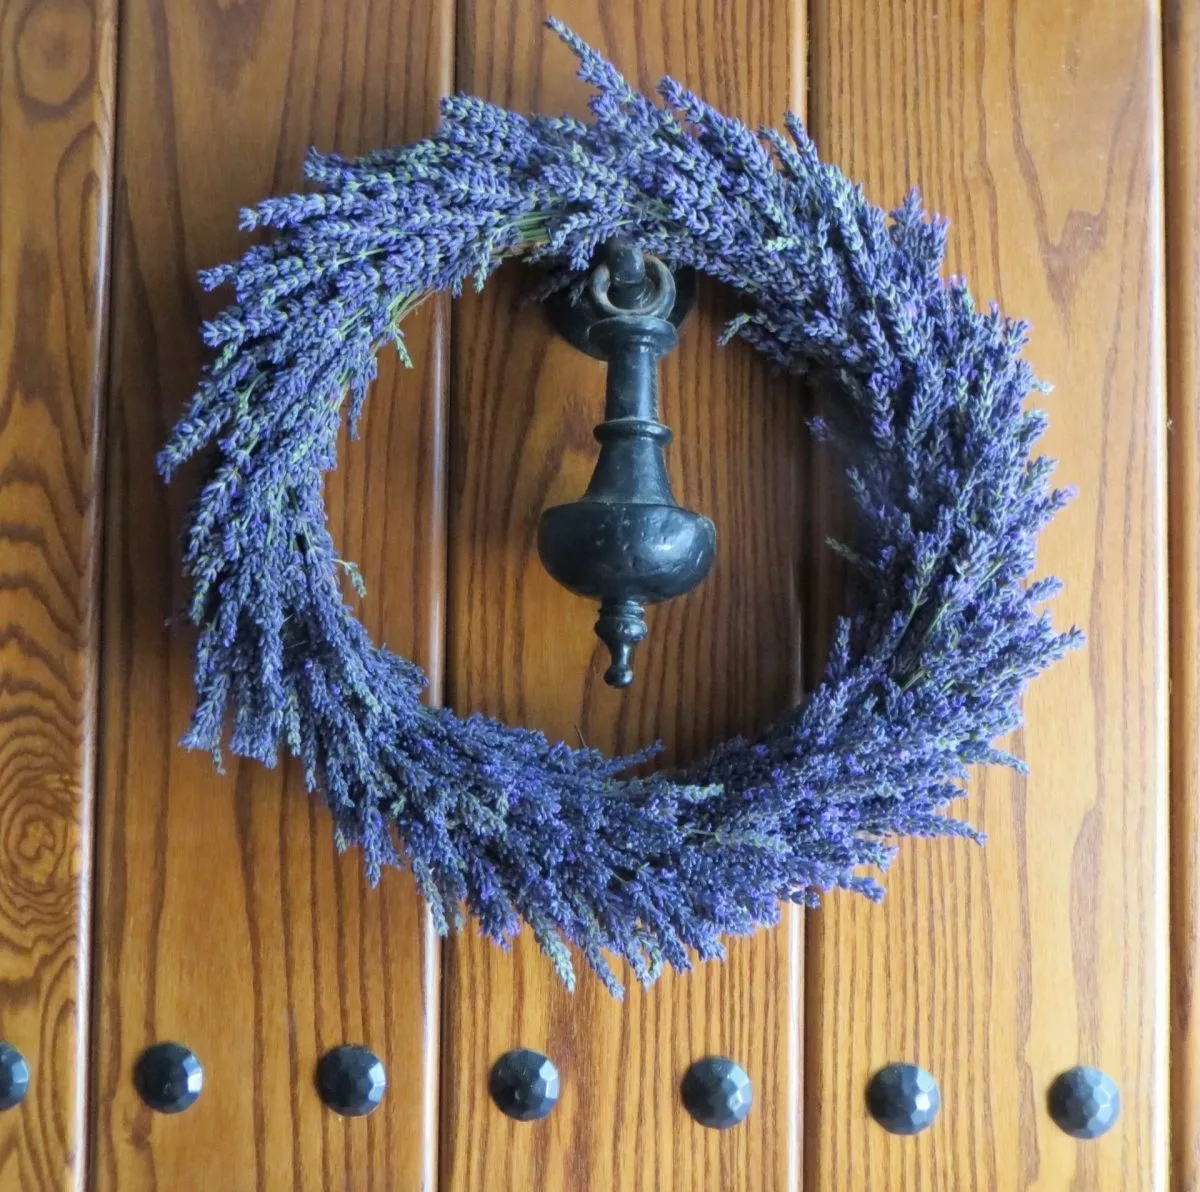 make or buy sustainable presents - lavender wreath